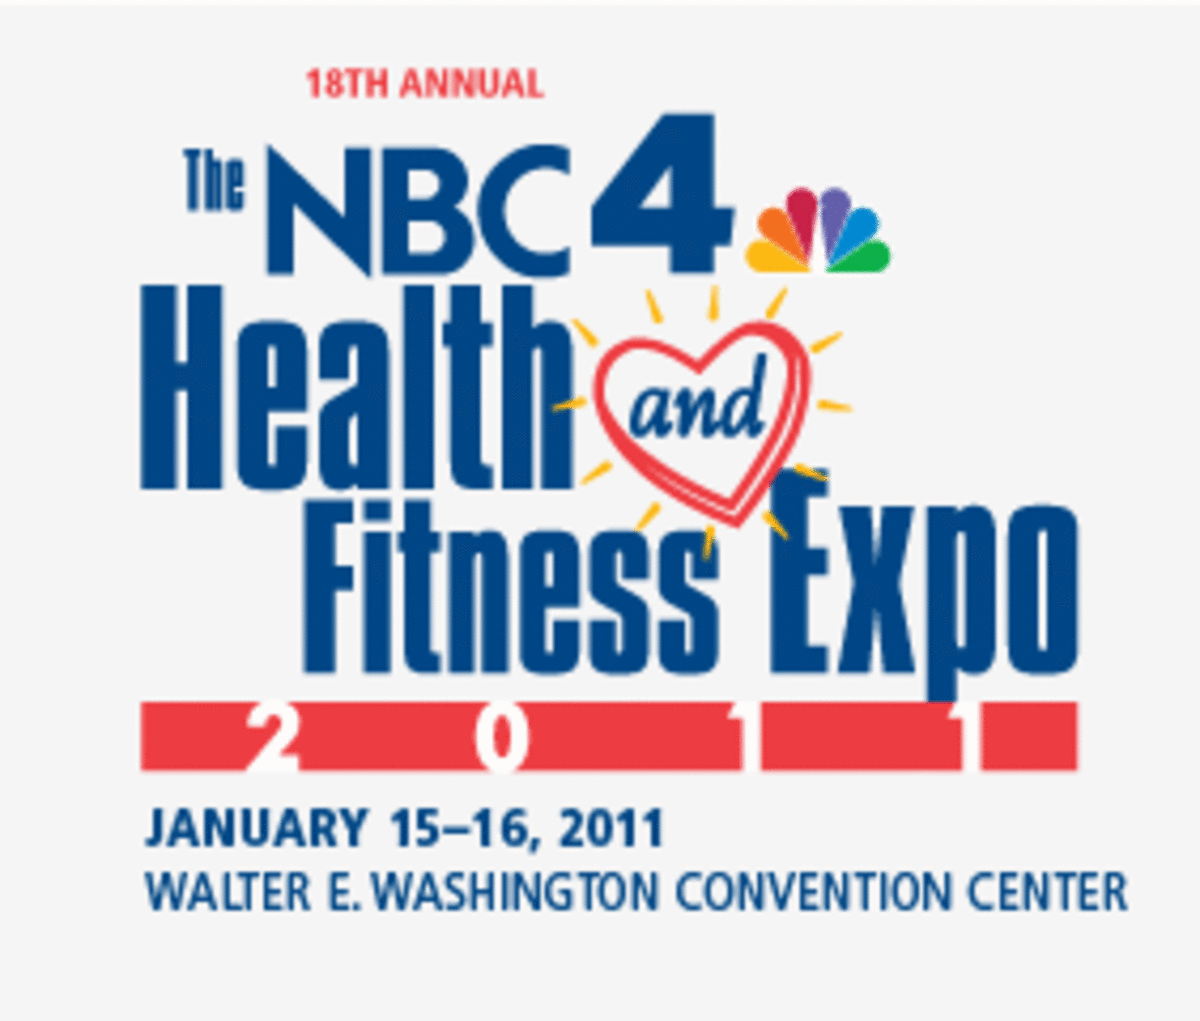 Every year NBC4 hosts the Health and Fitness Expo at the Walter E. Washington Convention Center in D.C. Photo courtesy freeindc.blogspot.com.